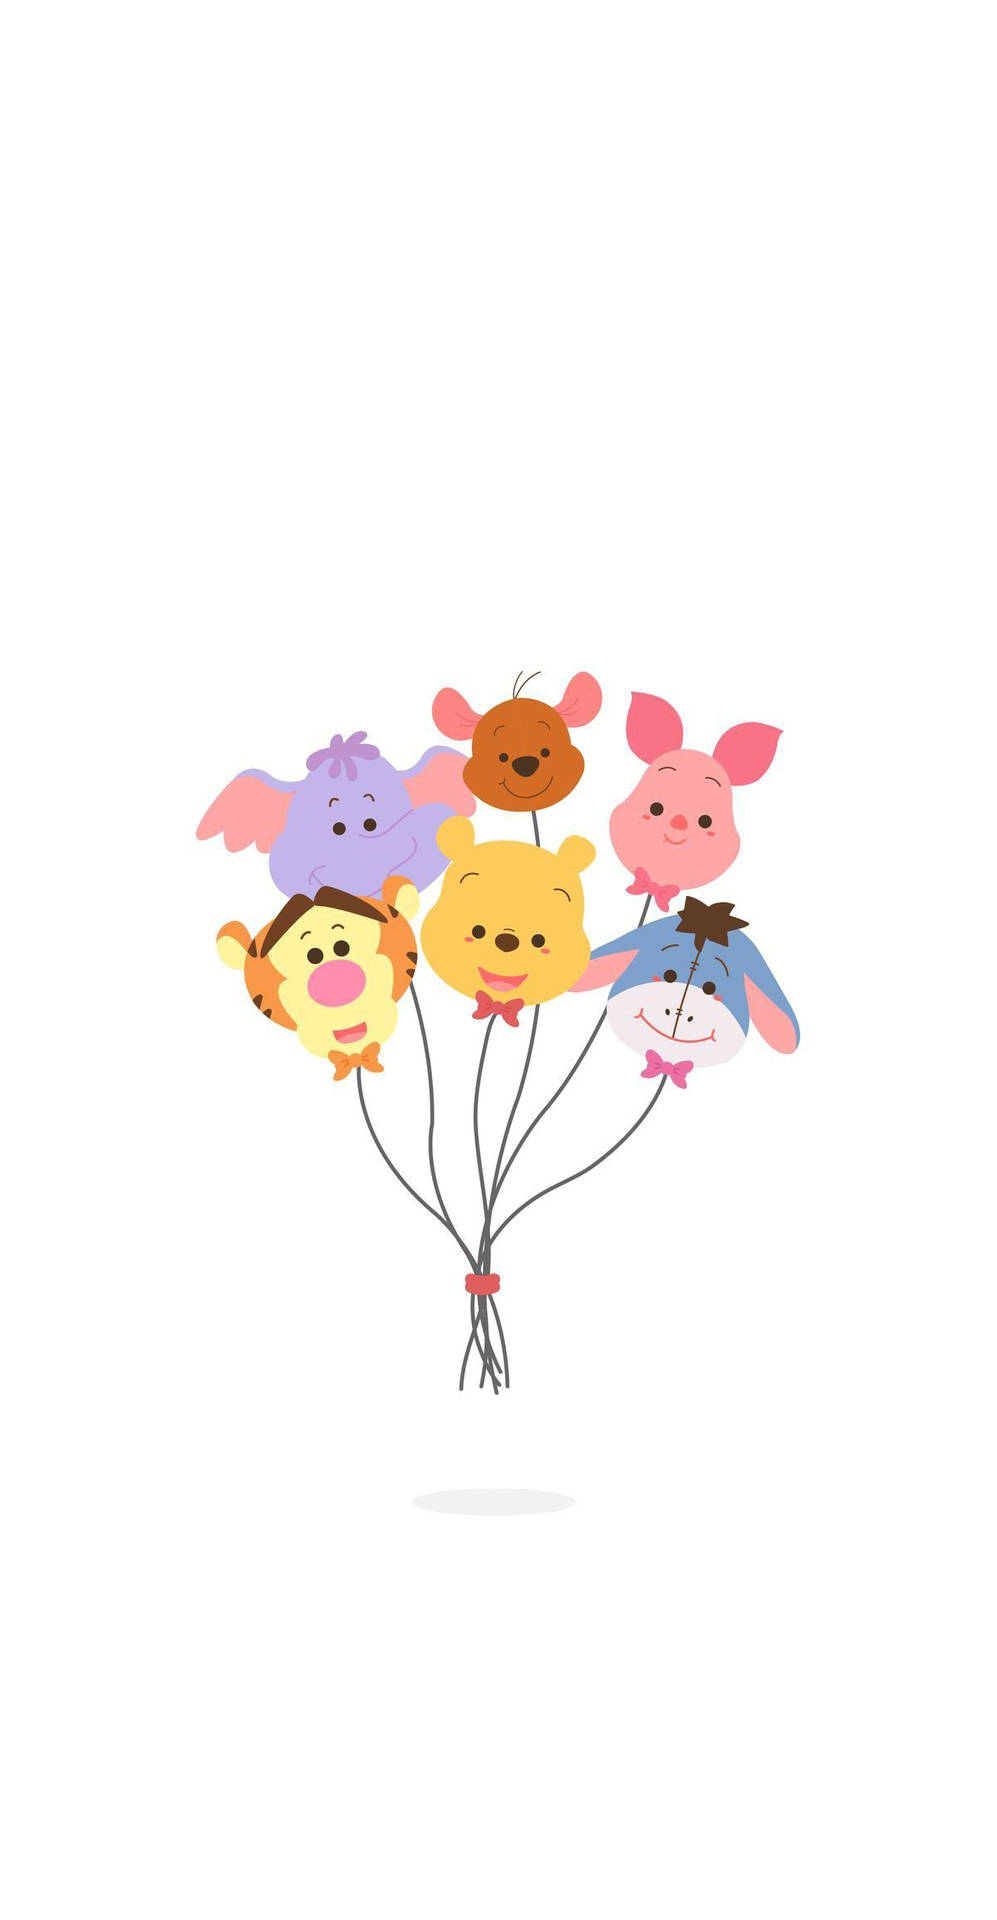 Winnie The Pooh As Balloons